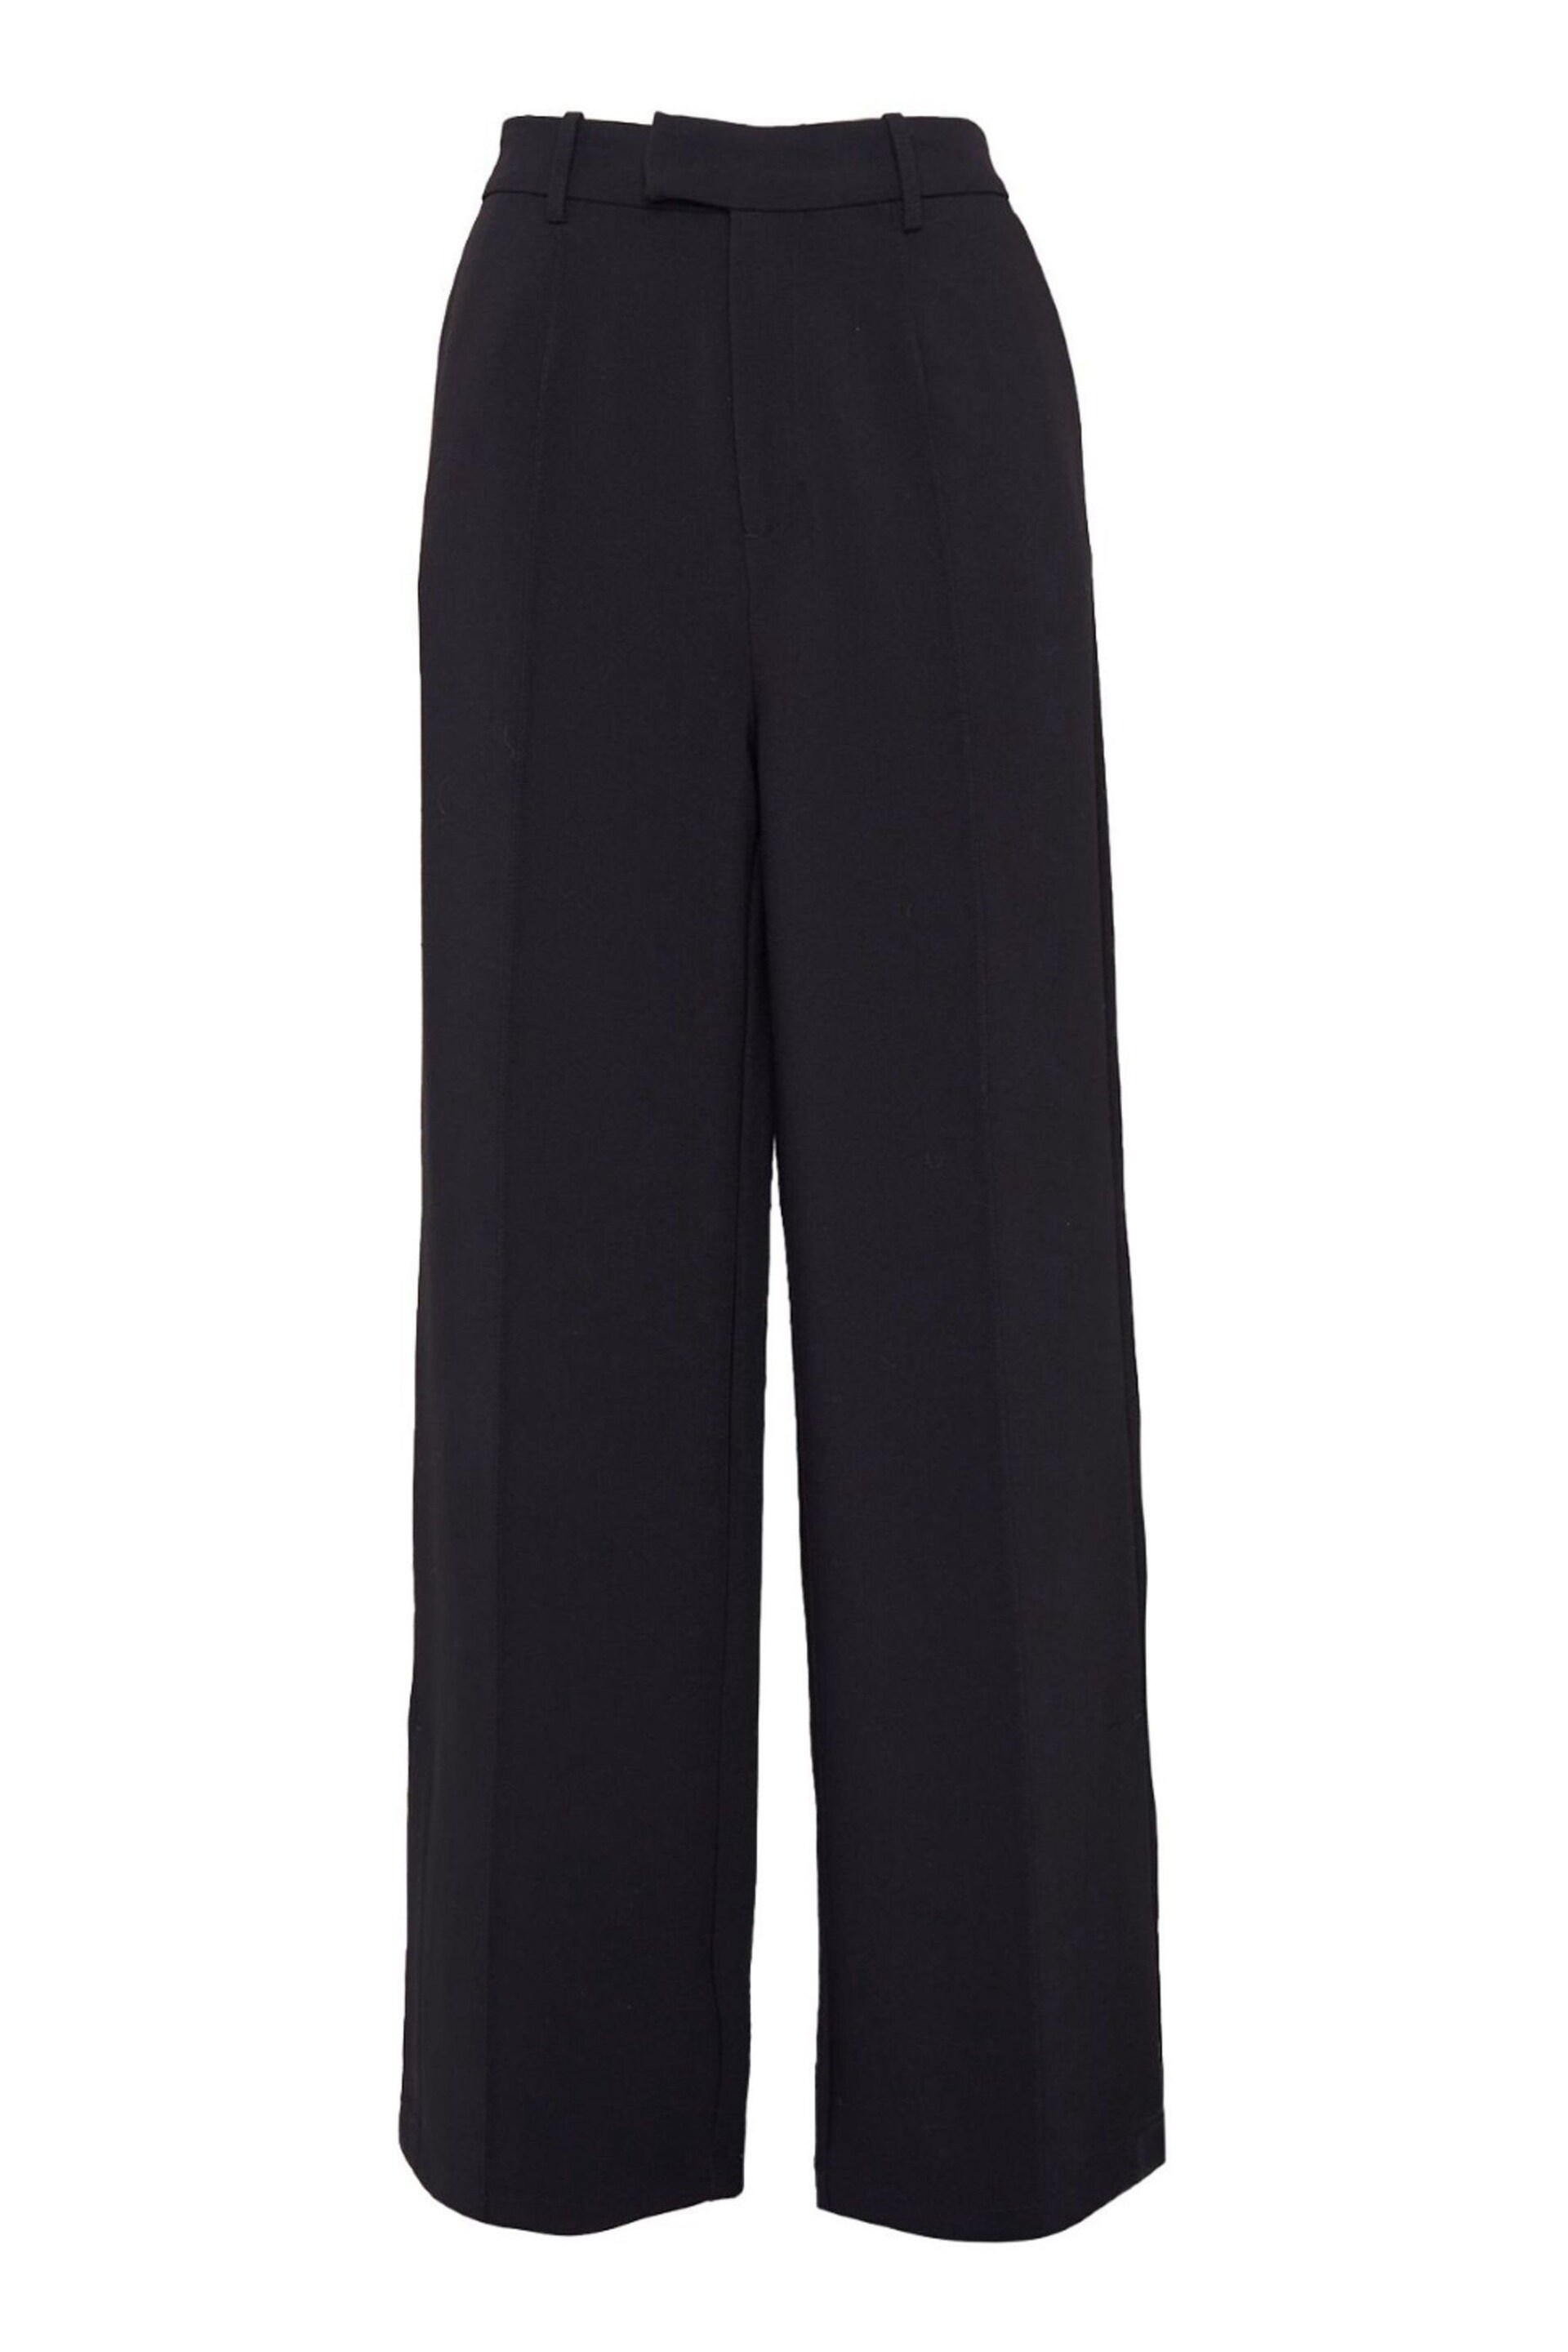 Another Sunday Wide Leg Split Side Black Trousers - Image 3 of 5